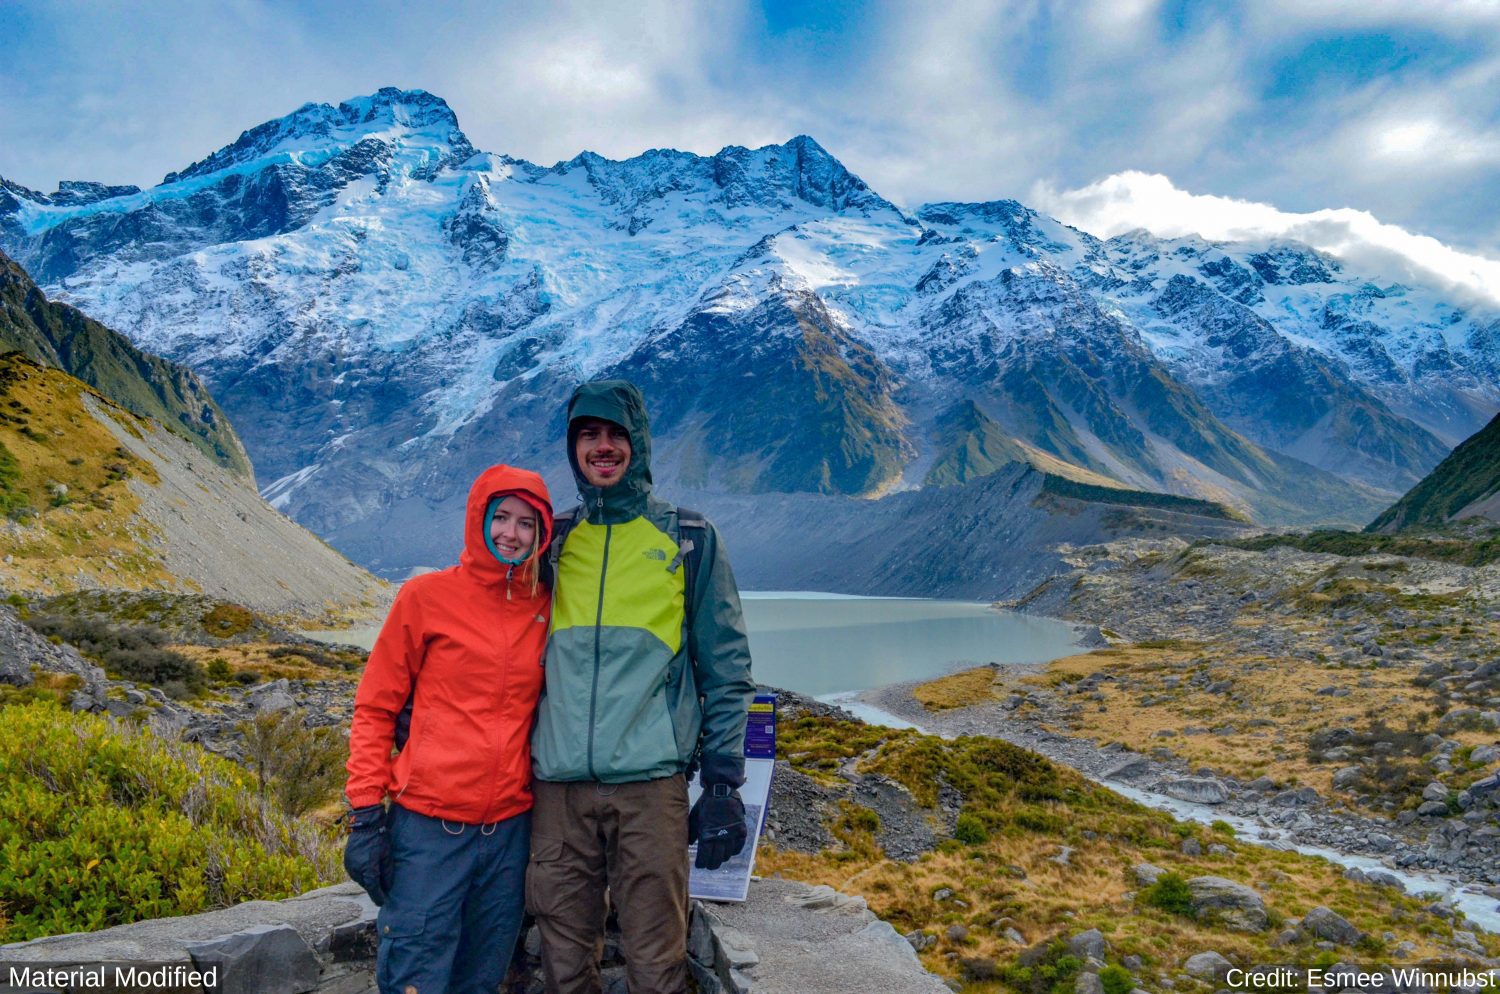 New Zealand: See & Experience it ALL in 11 Days, 1st Class Custom Tours